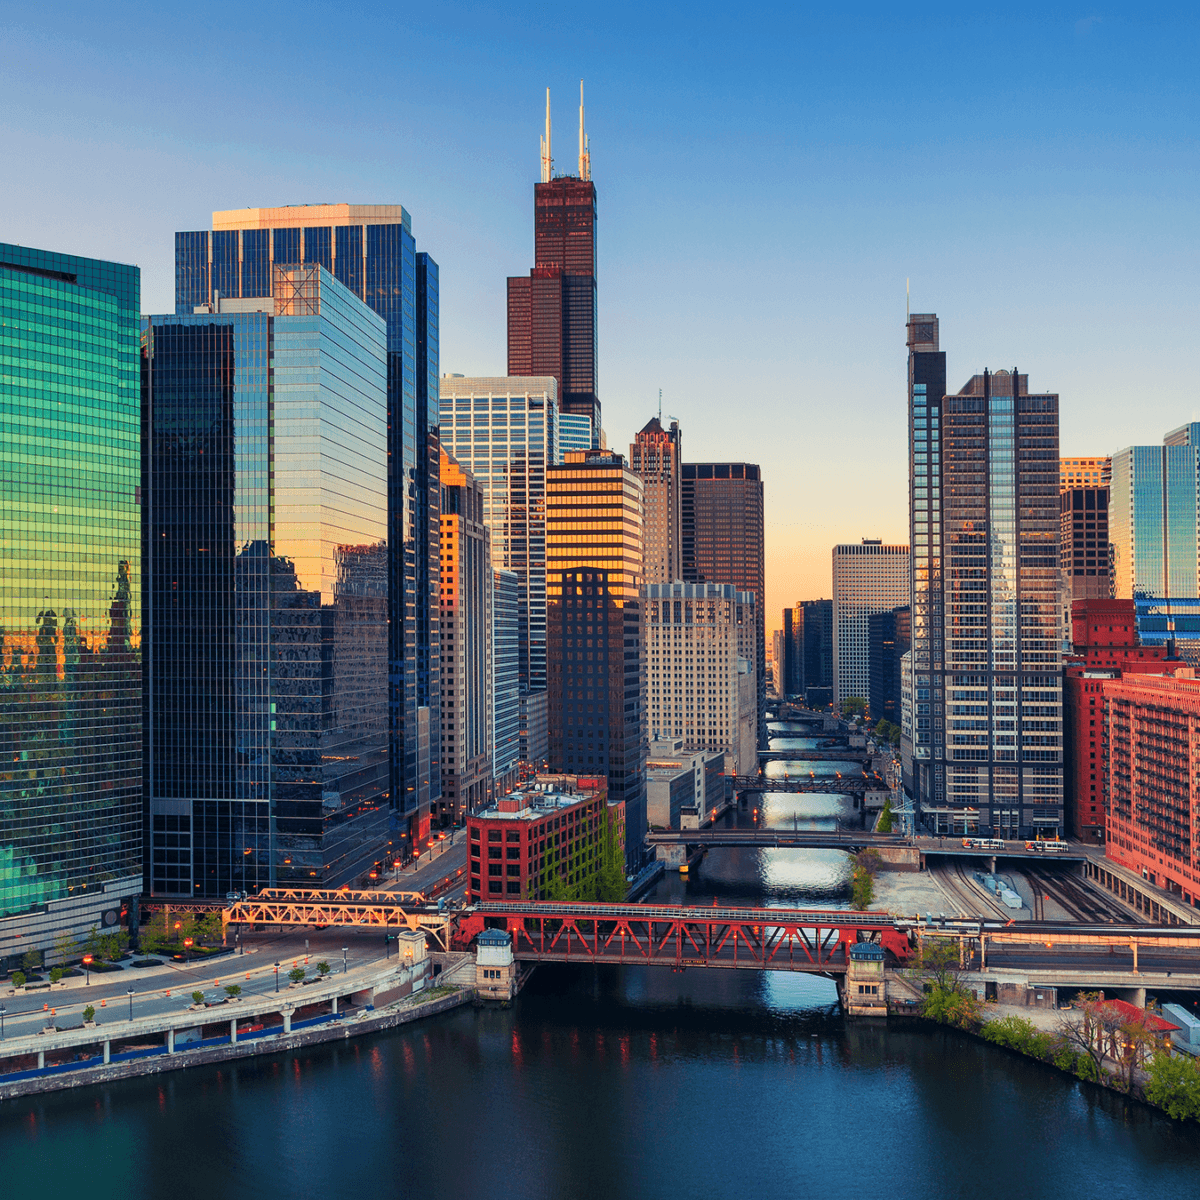 an image of the Chicago city skyline at sunset